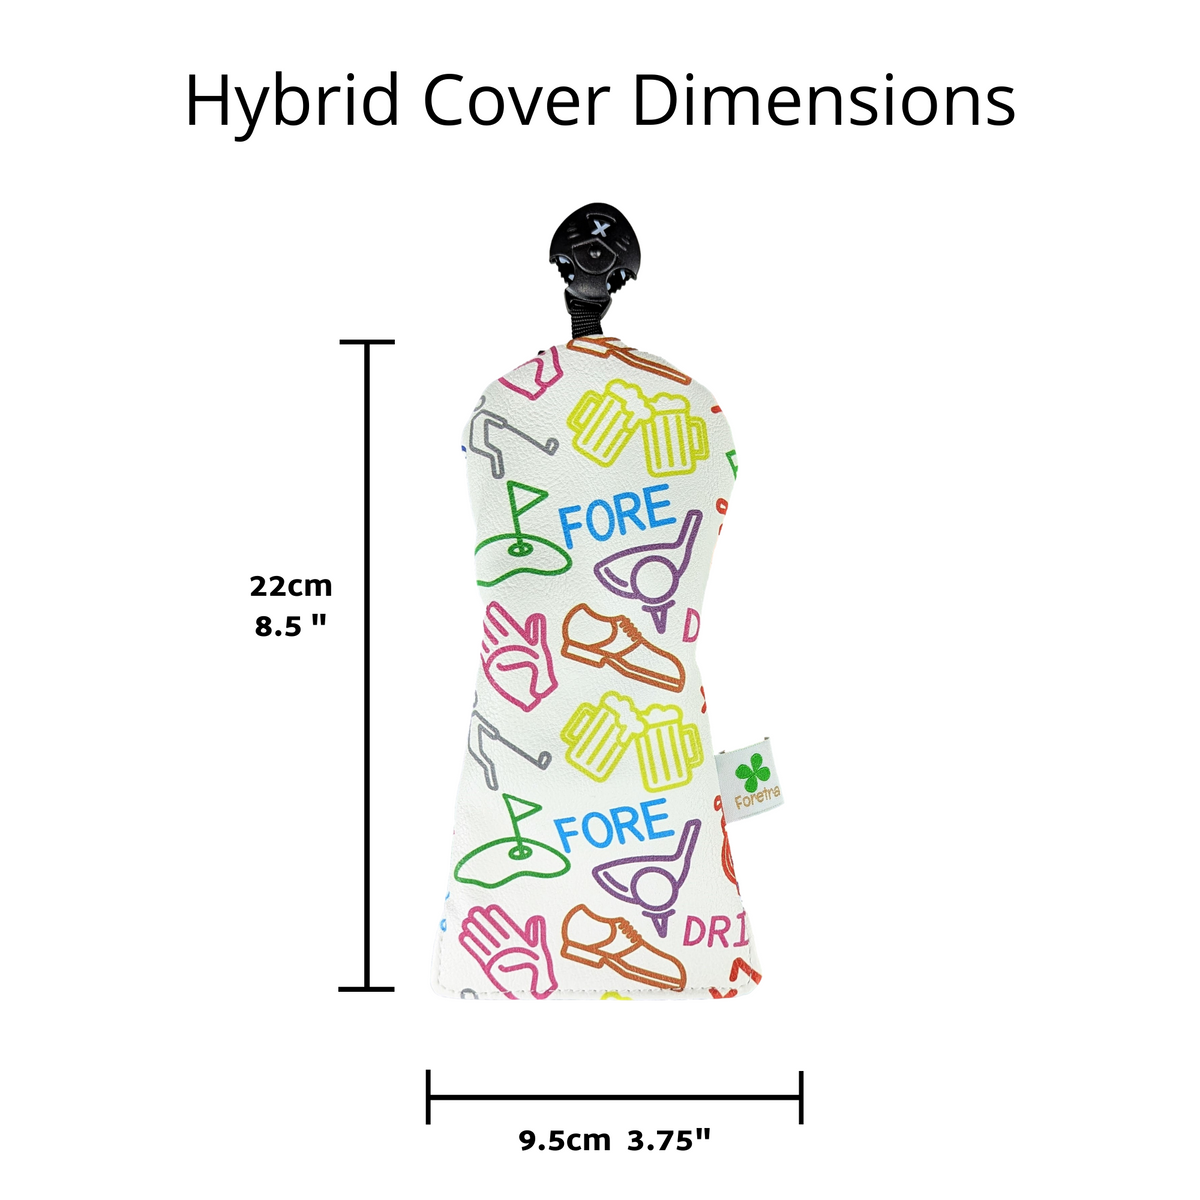 GOLF ICONS pattern - Utility / Hybrid Headcover